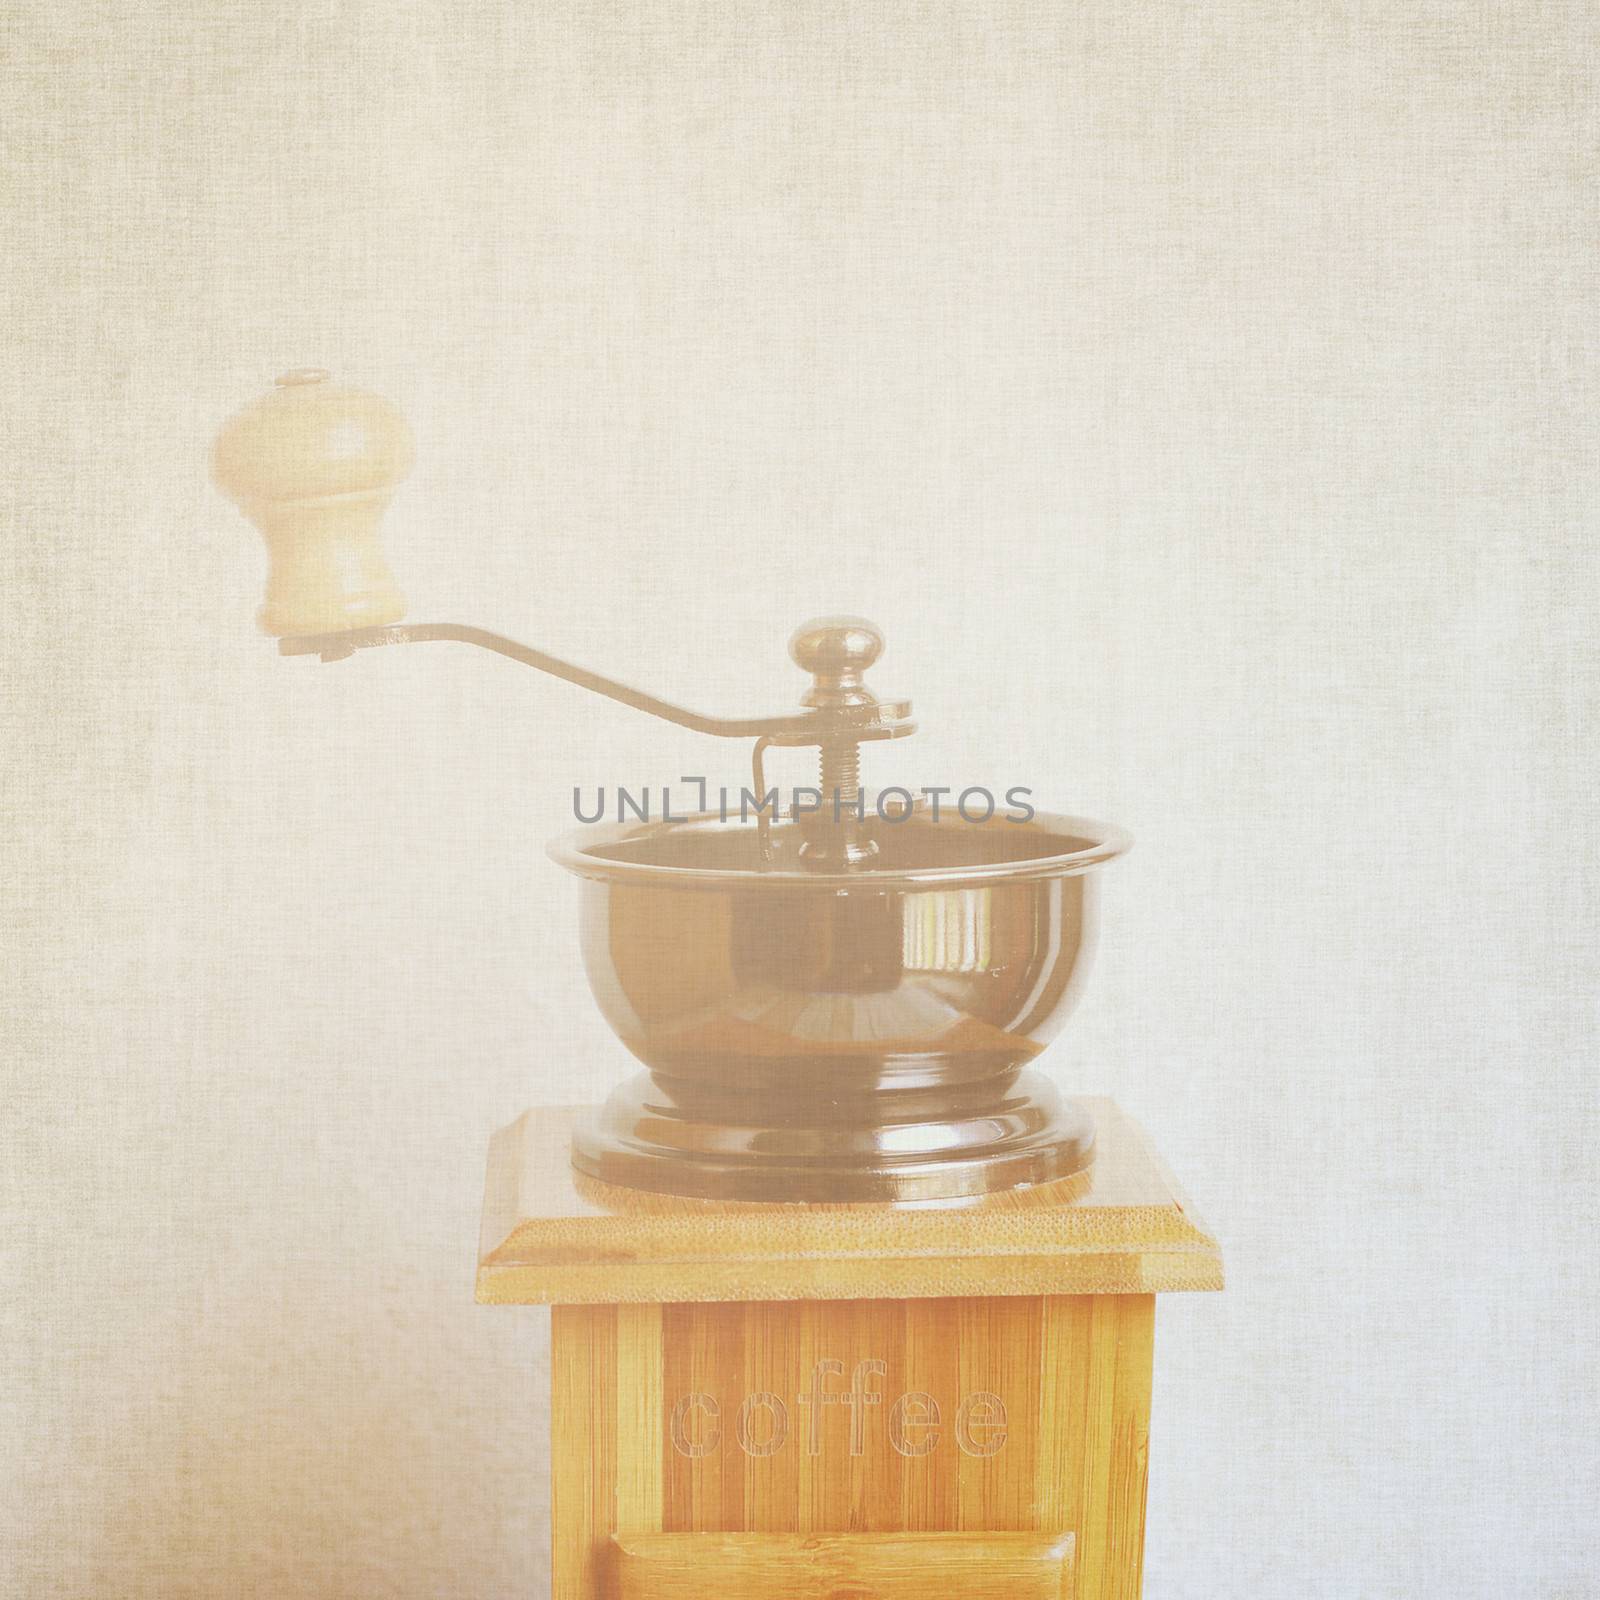 Coffee grinder with retro filter effect by nuchylee